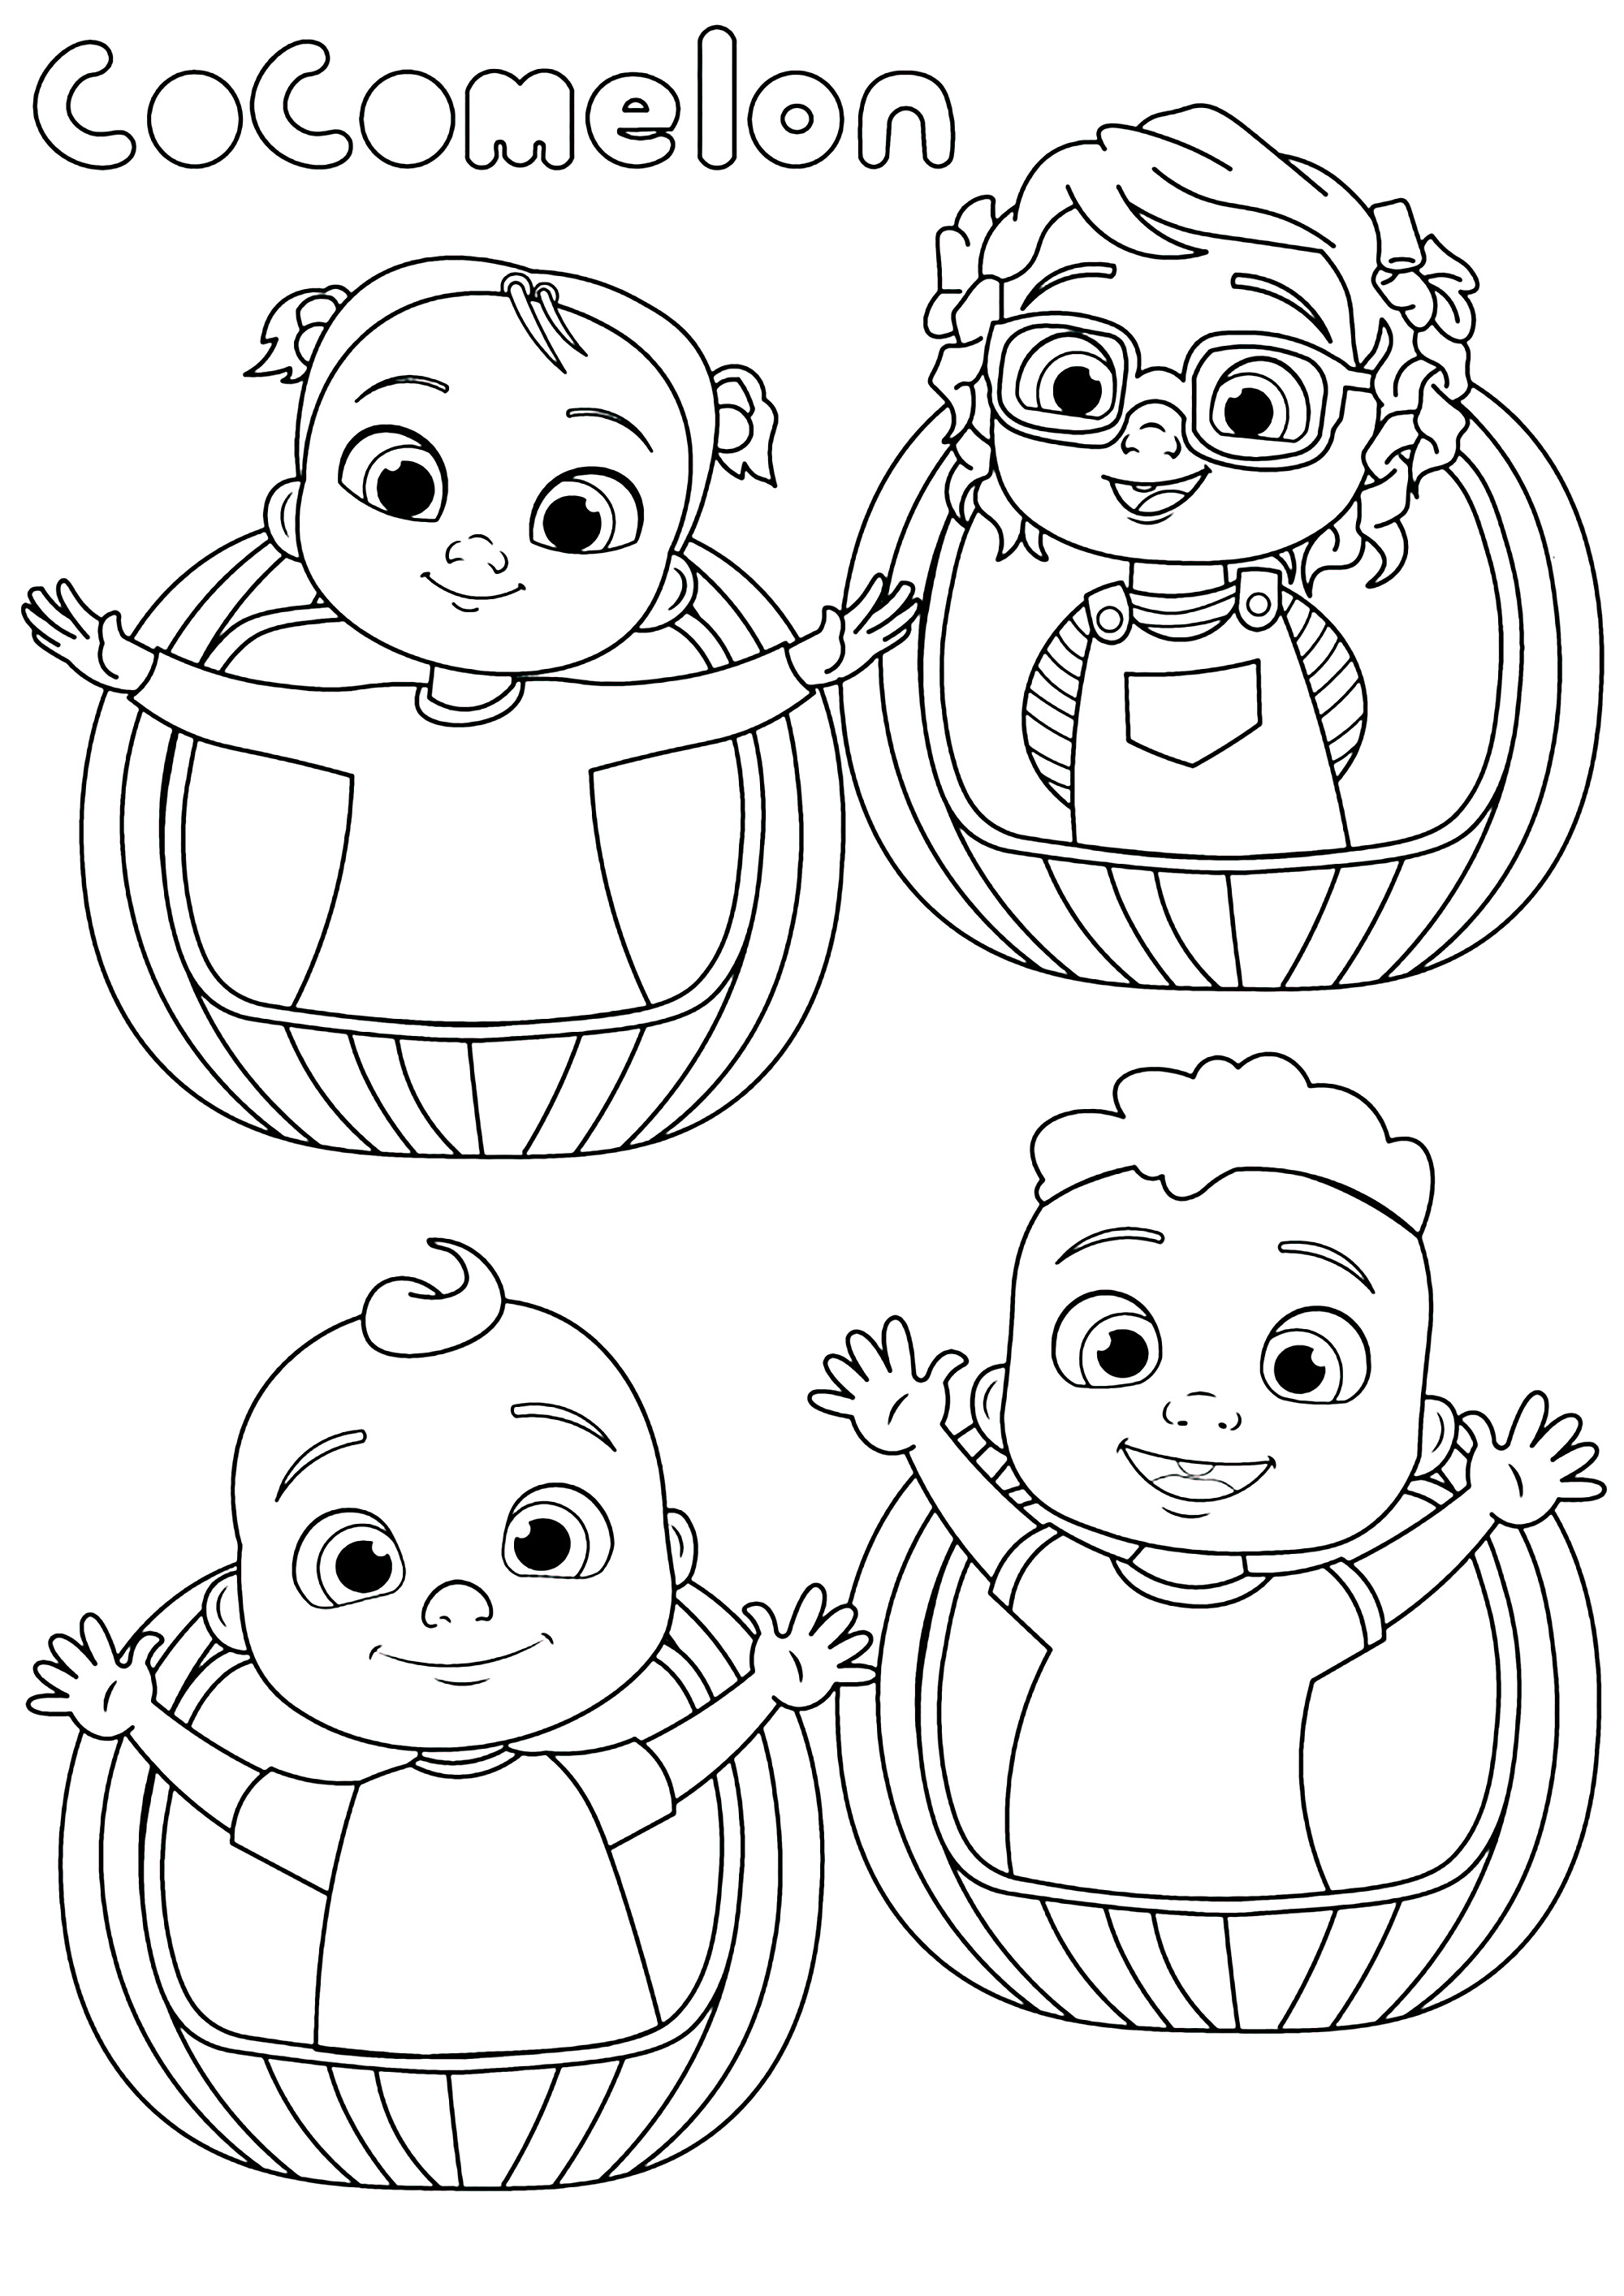 Four Cocomelon characters - Cocomelon Kids Coloring Pages